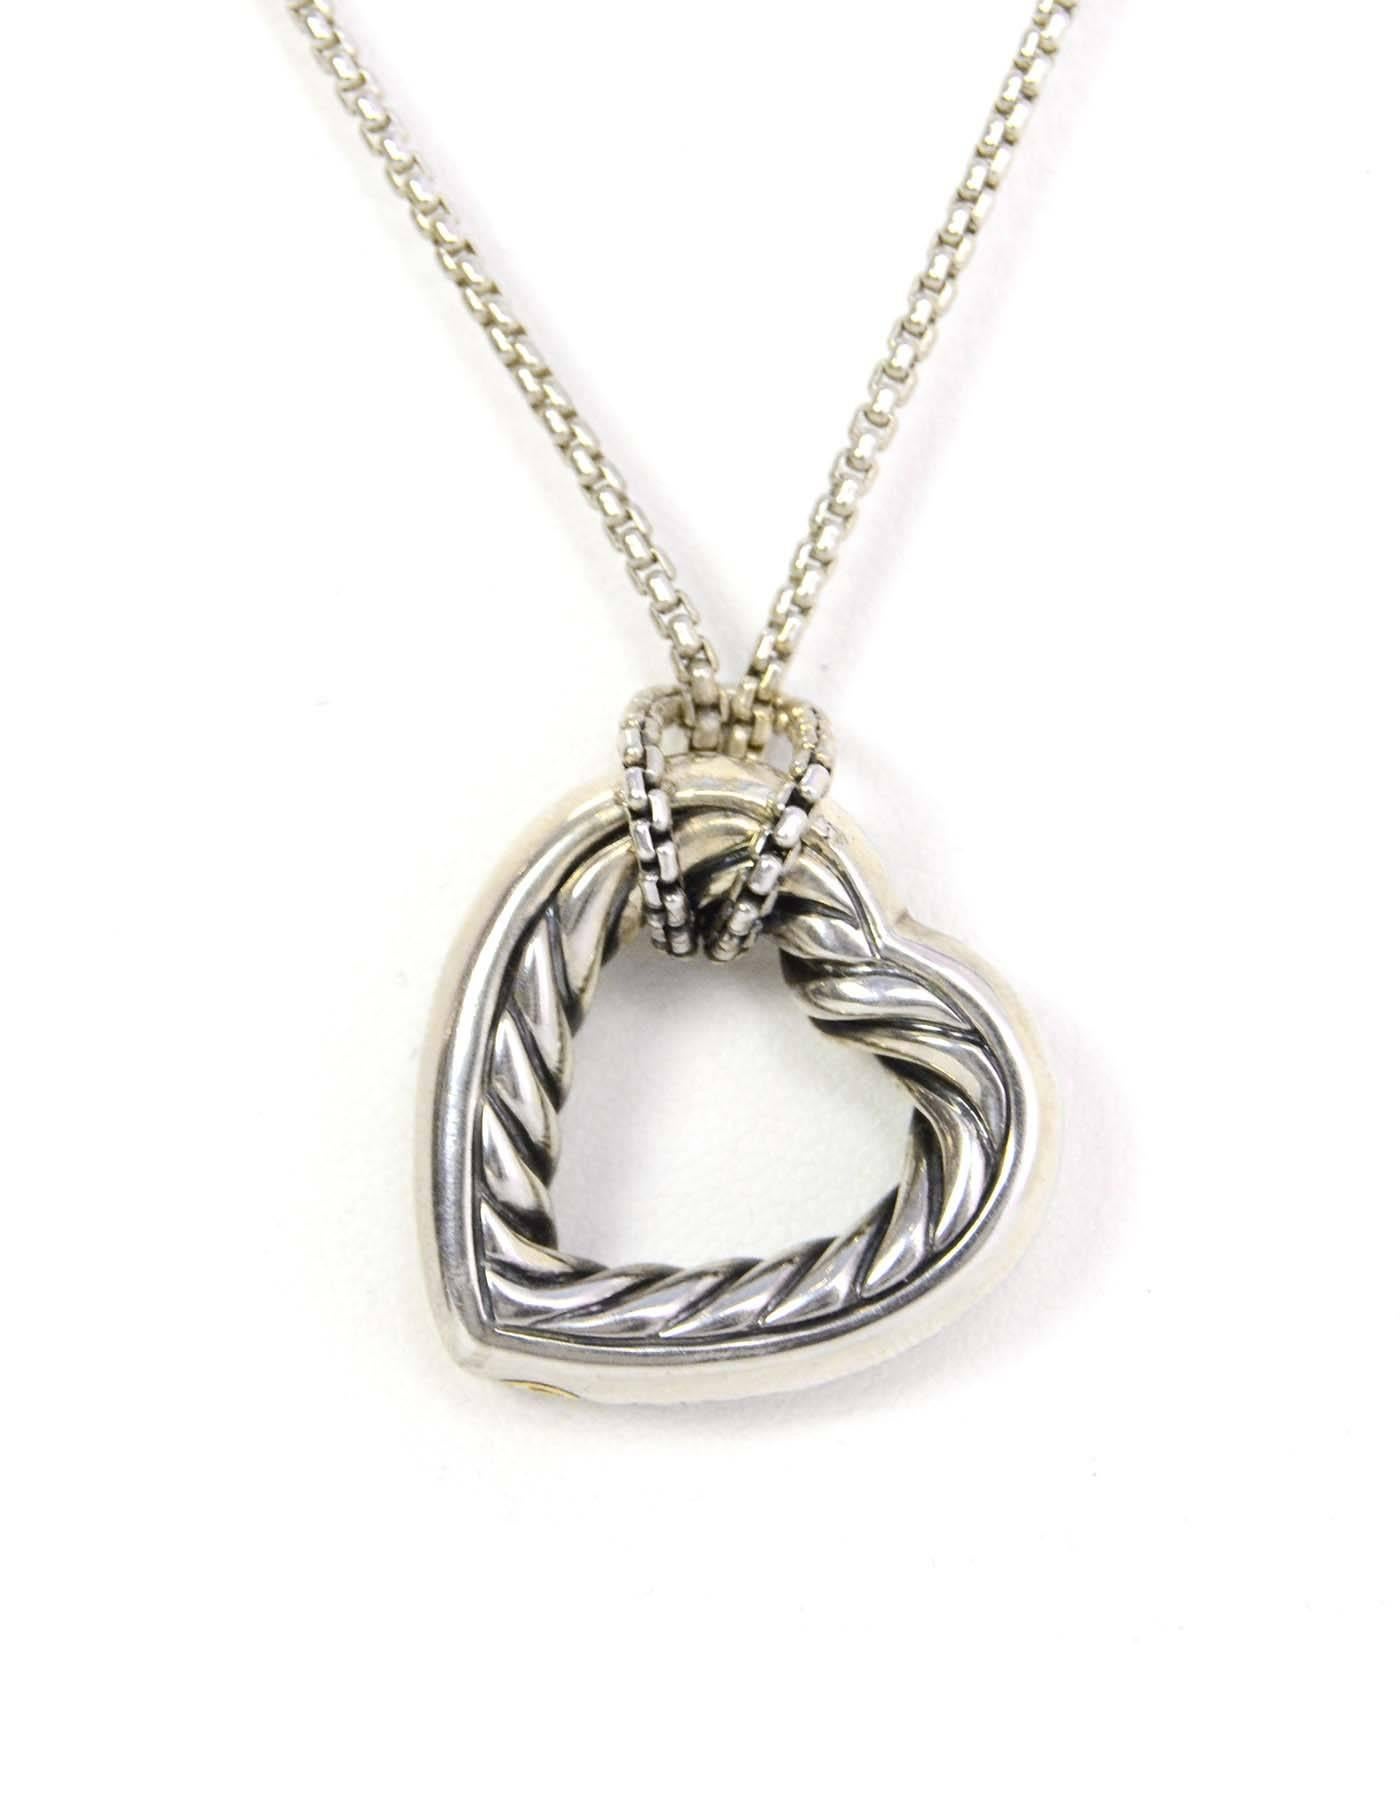 David Yurman Sterling & 18k Heart Pendant Necklace
Features large sculpted heart pendant
Color: Silver and gold
Materials: Sterling and 18k gold
Closure: Lobster claw clasp
Stamp: DY 925 750
Retail Price: $395 + tax
Overall Condition: